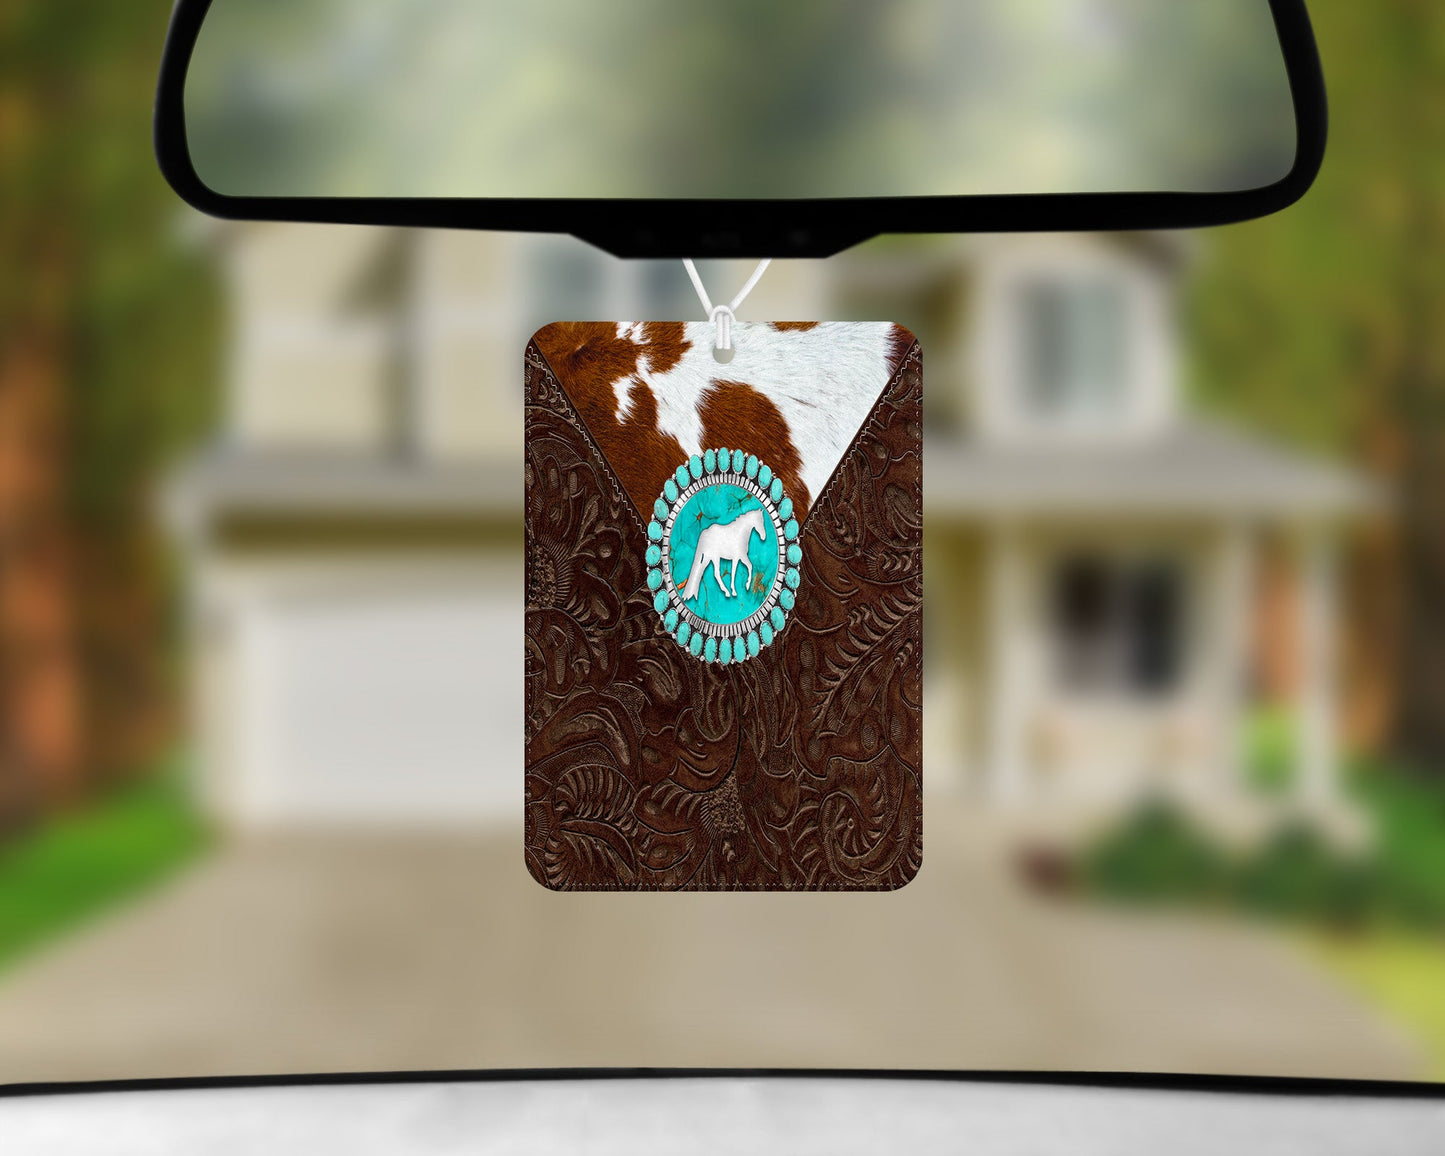 Cowhide Leather Horse|Freshie|Includes Scent Bottle - Vehicle Air Freshener